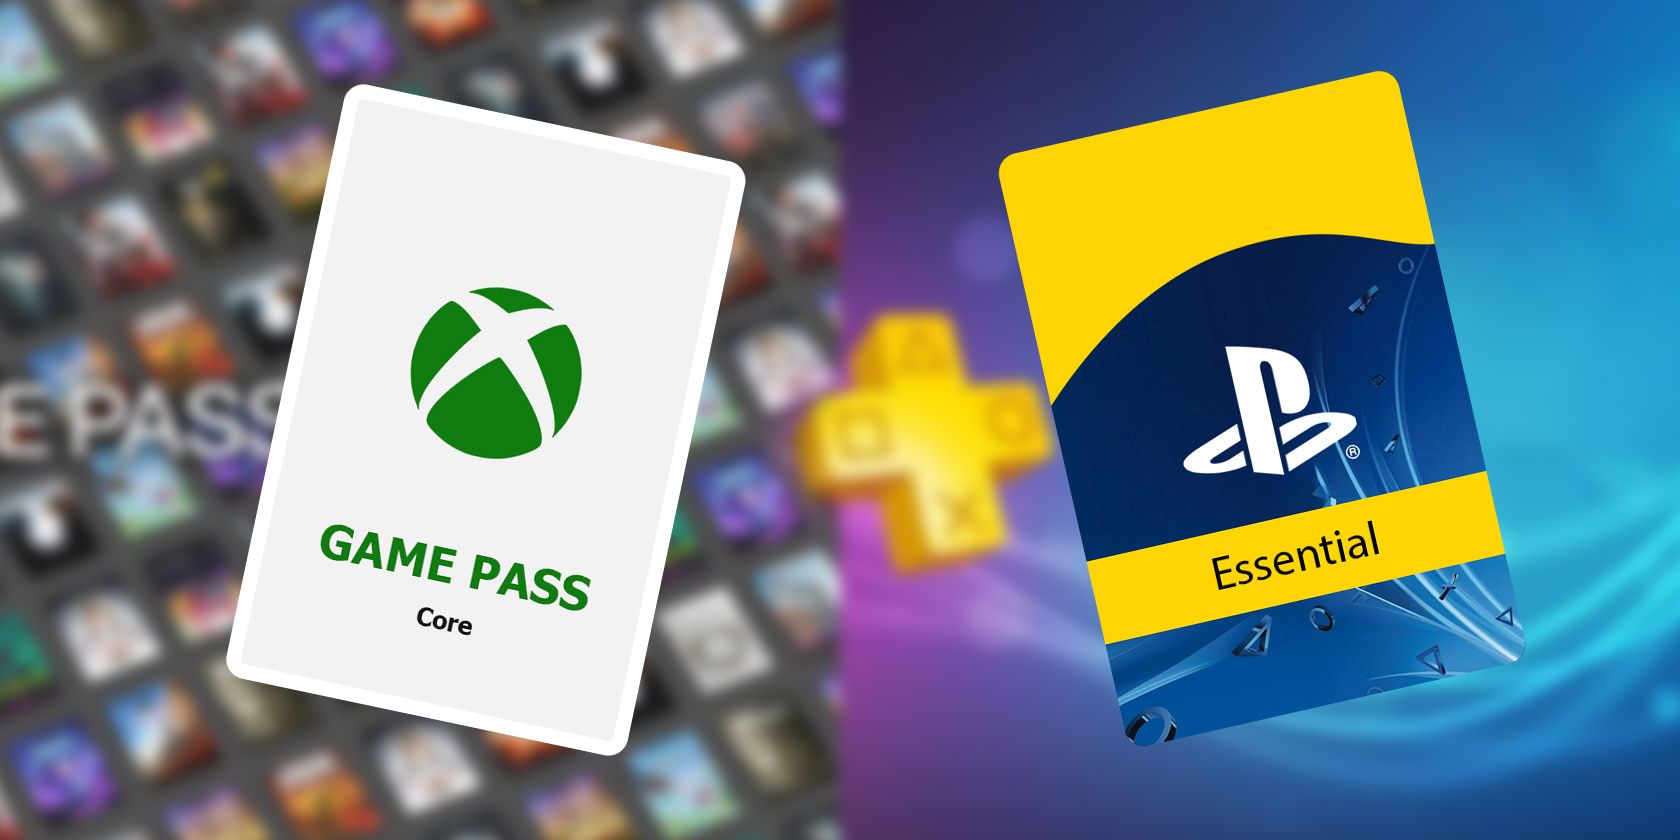 Xbox Game Pass vs PlayStation Now: Which service is better?